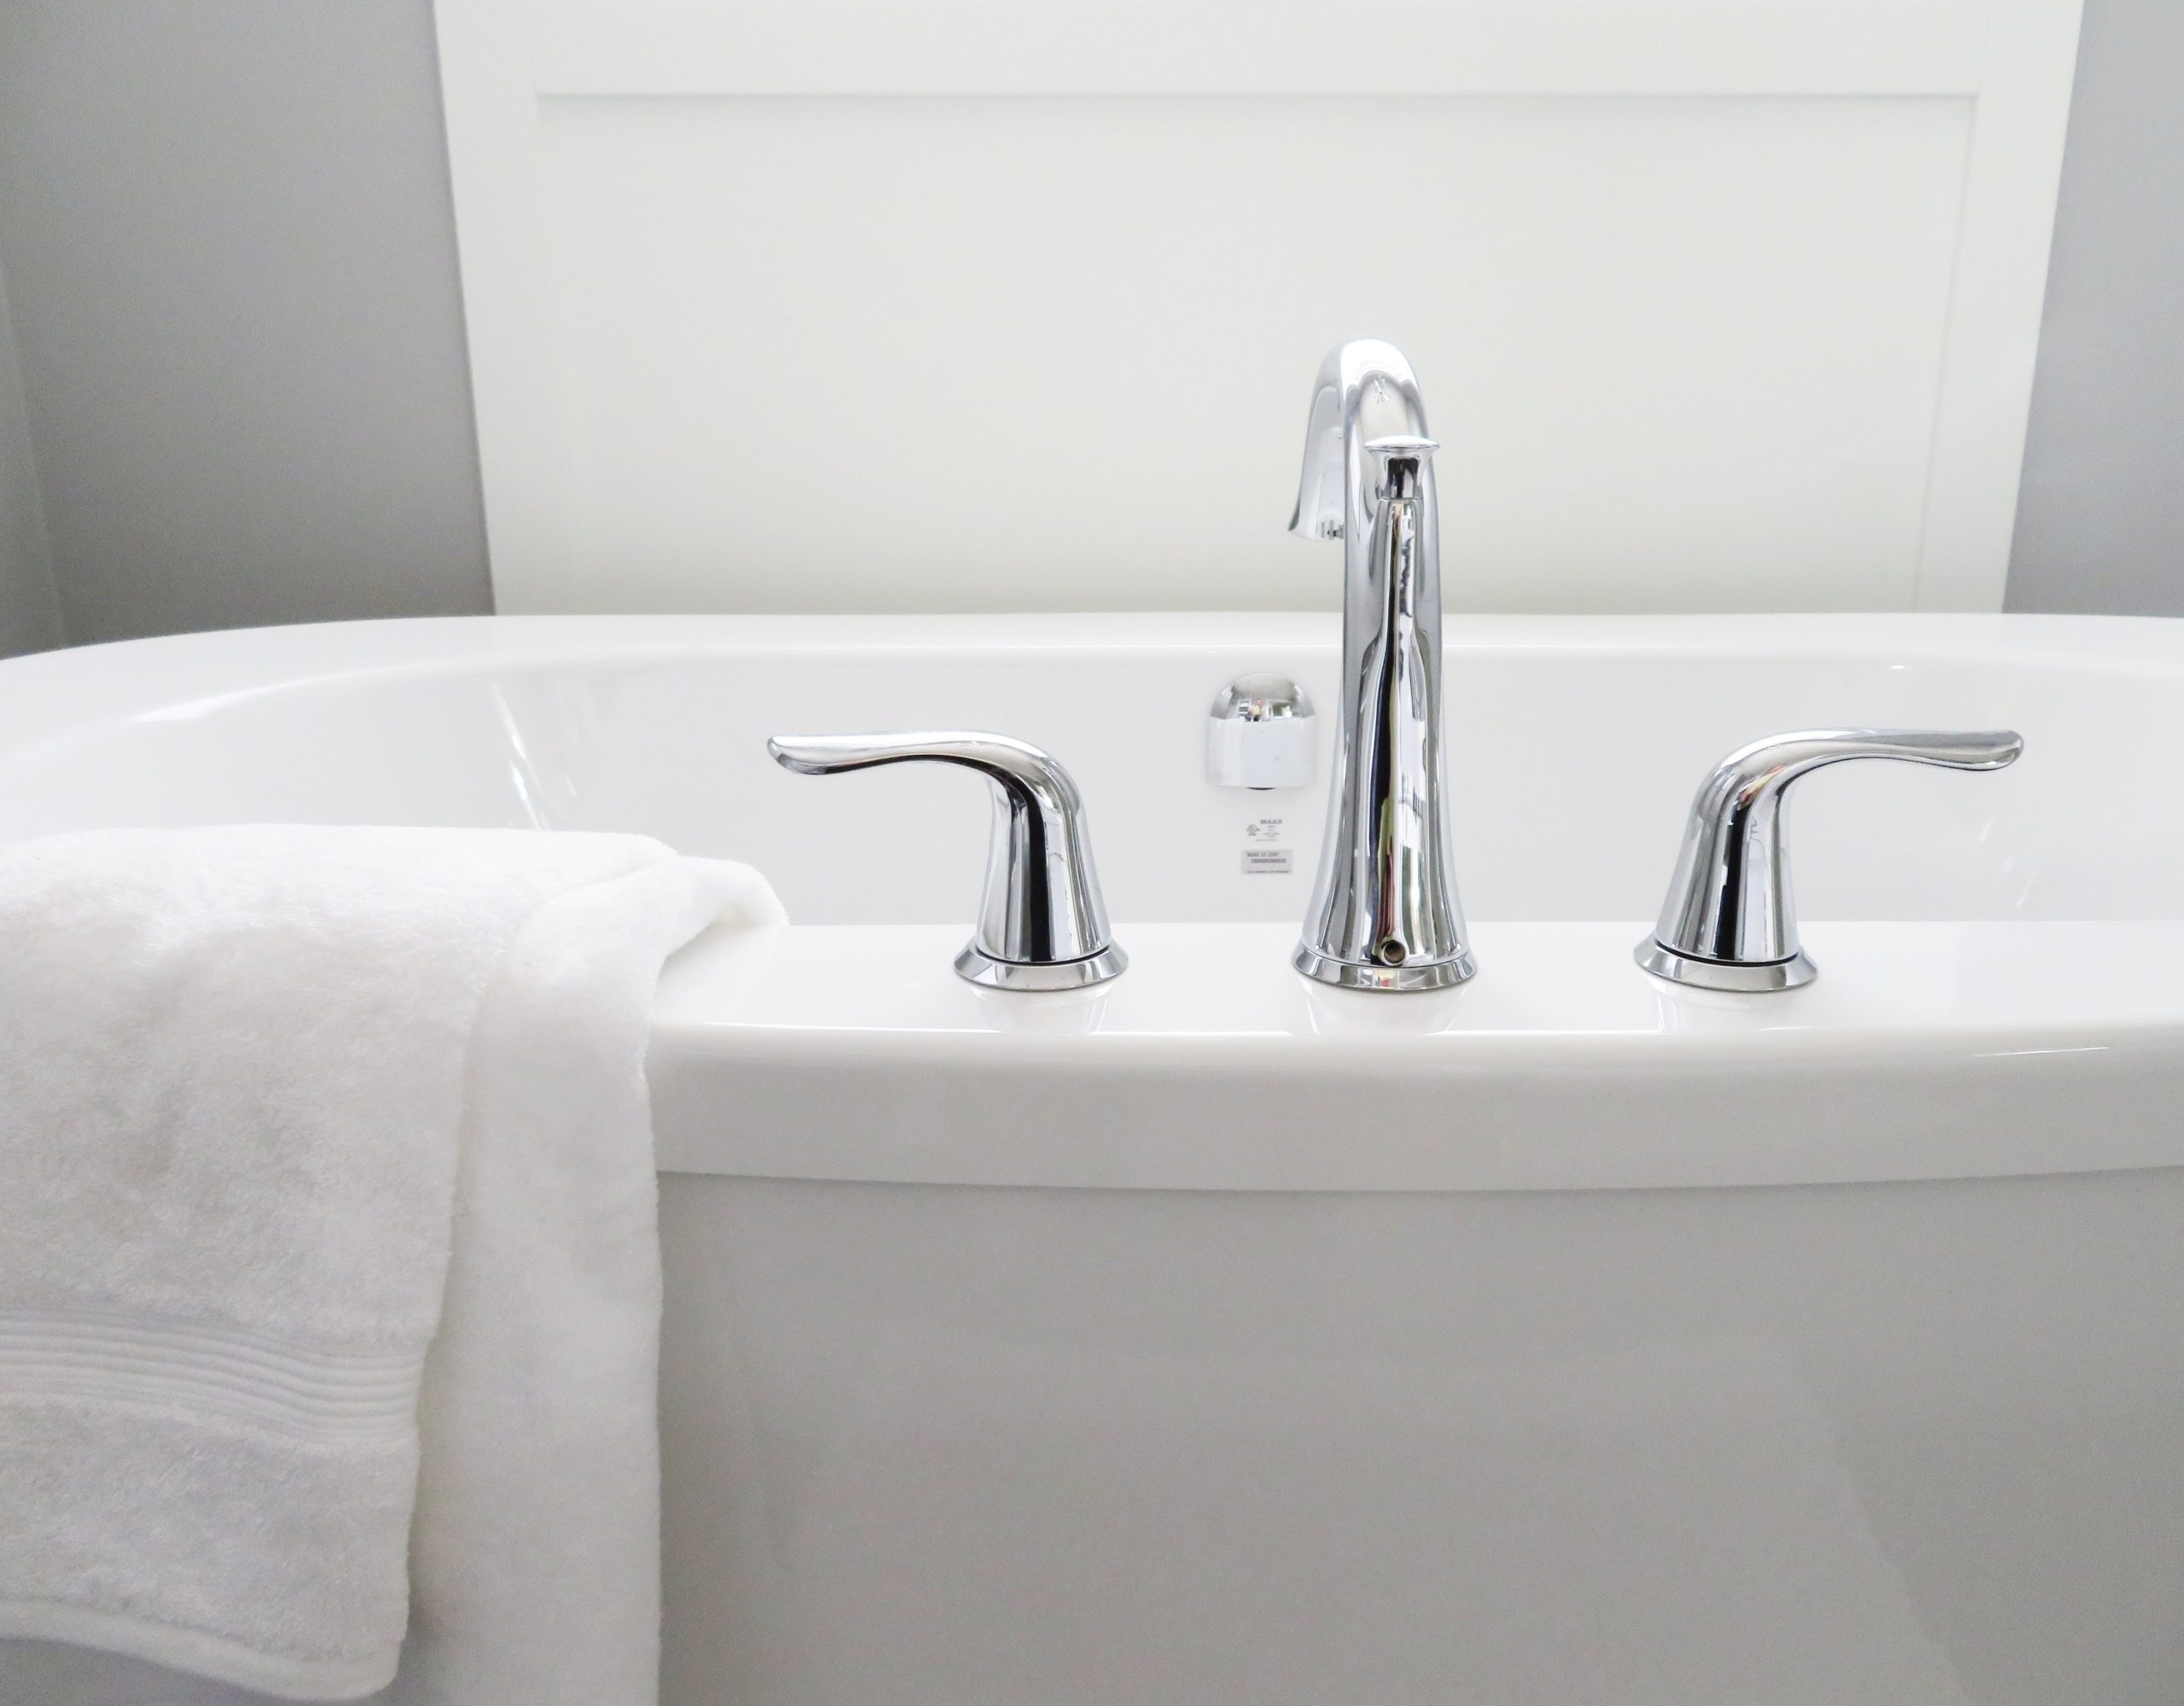 Picture of bath tub fixtures and a white towel